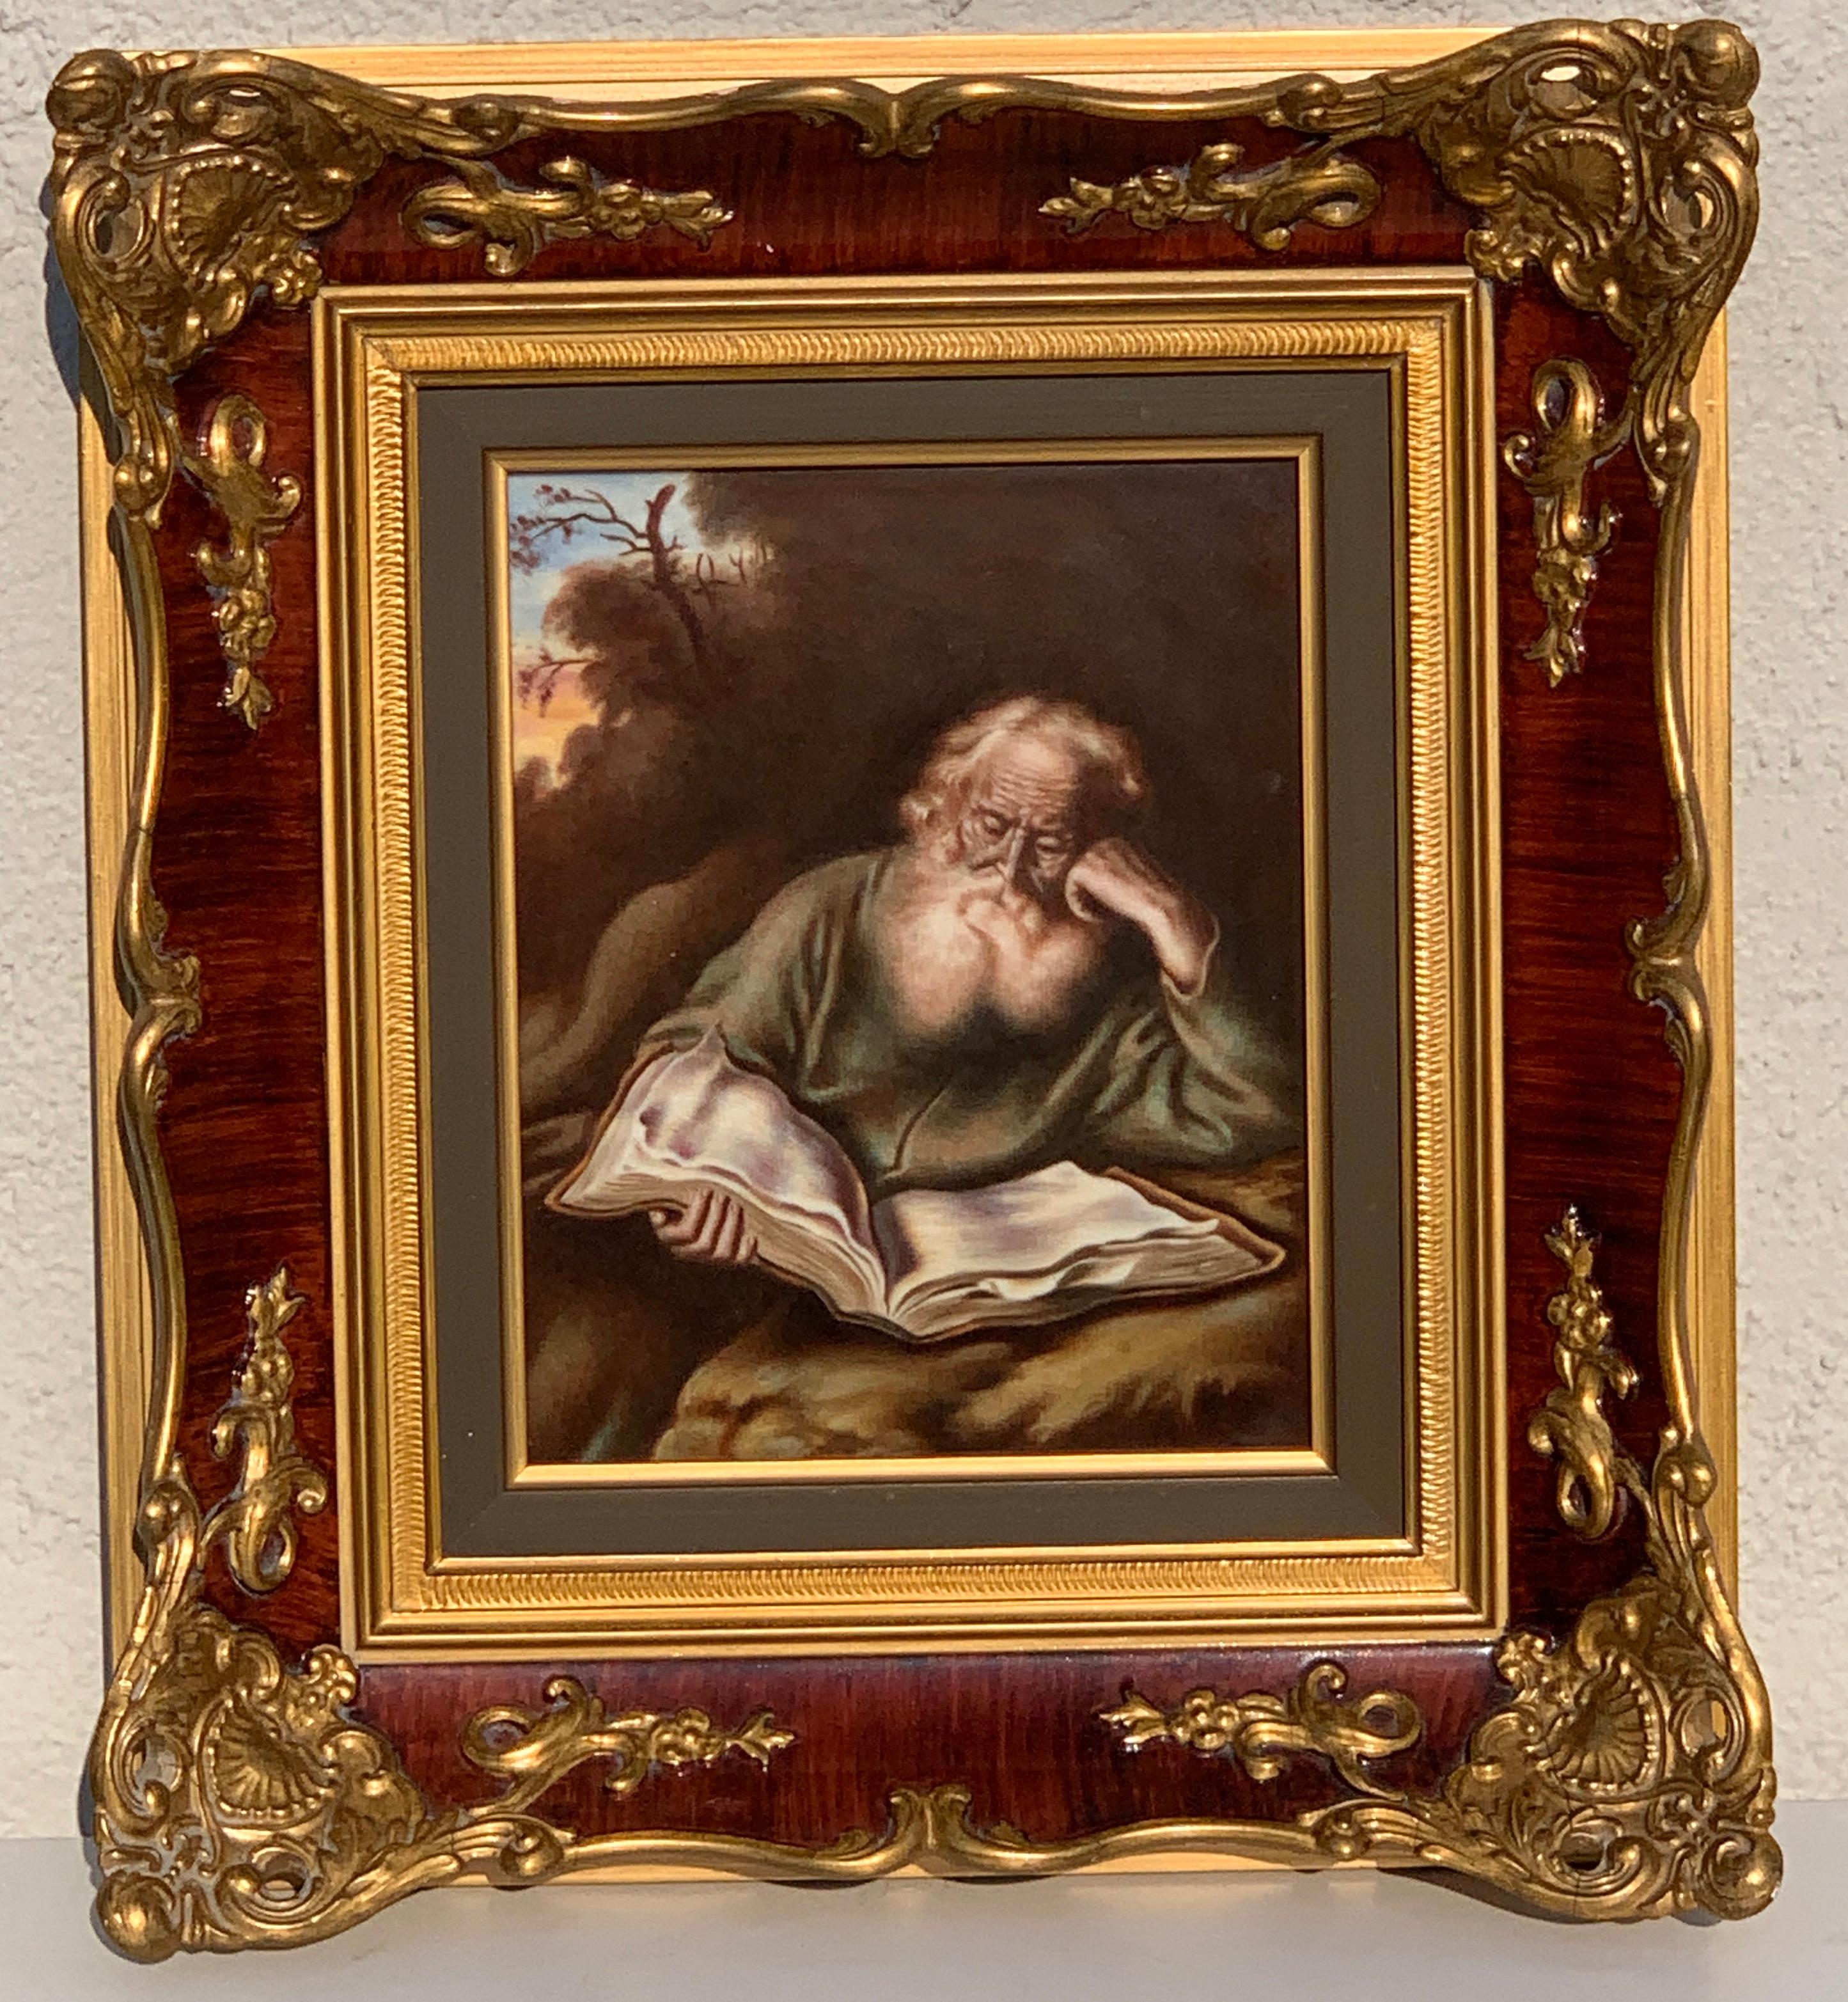 Rosenthal painting on porcelain of St. Jerome
After the painting by Einsiedler Von S. Koninck (1609-1659)
Marked on the back 